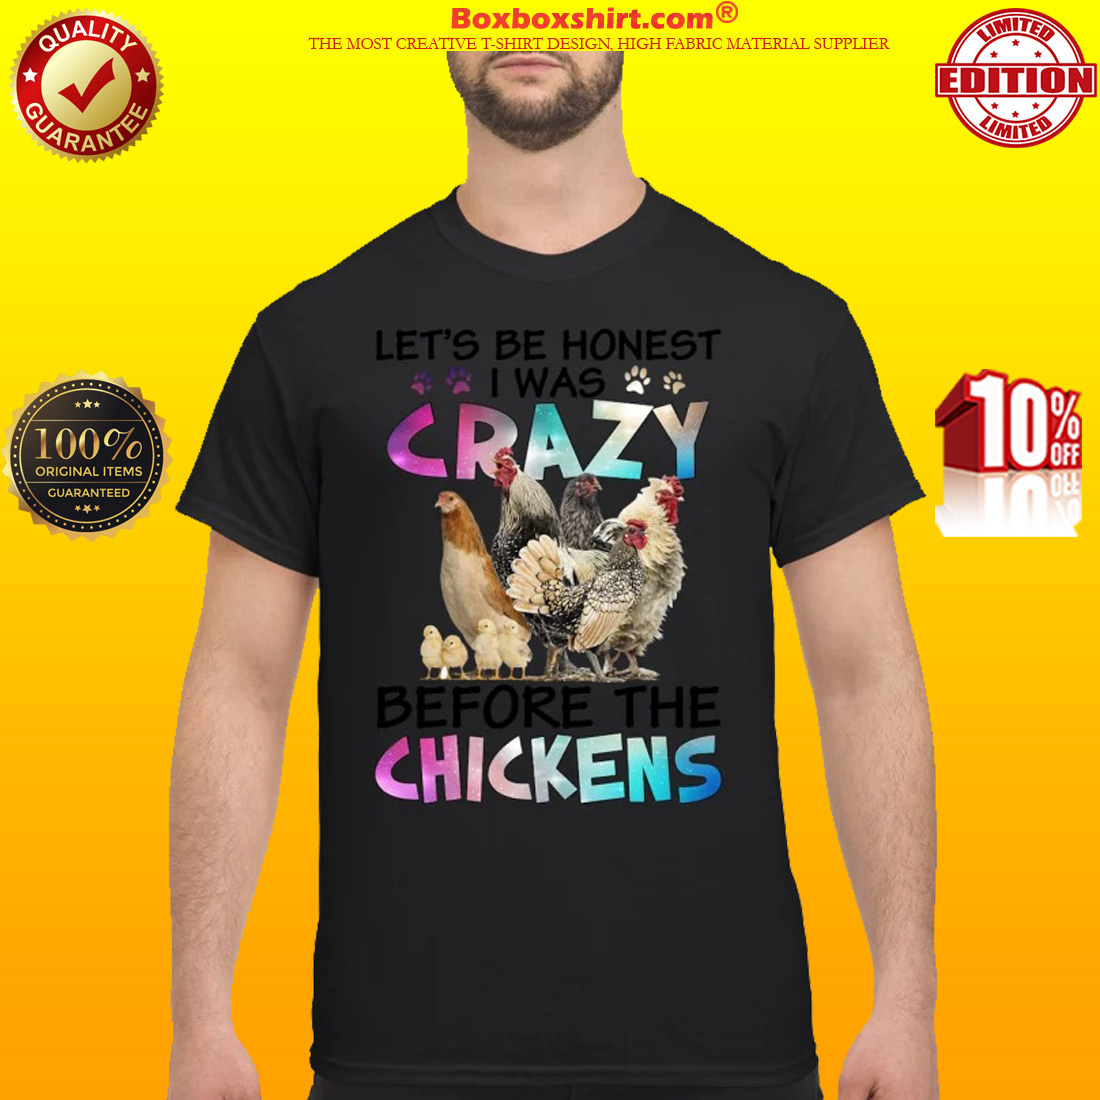 Let's be honest I was crazy before the chickens classic shirt